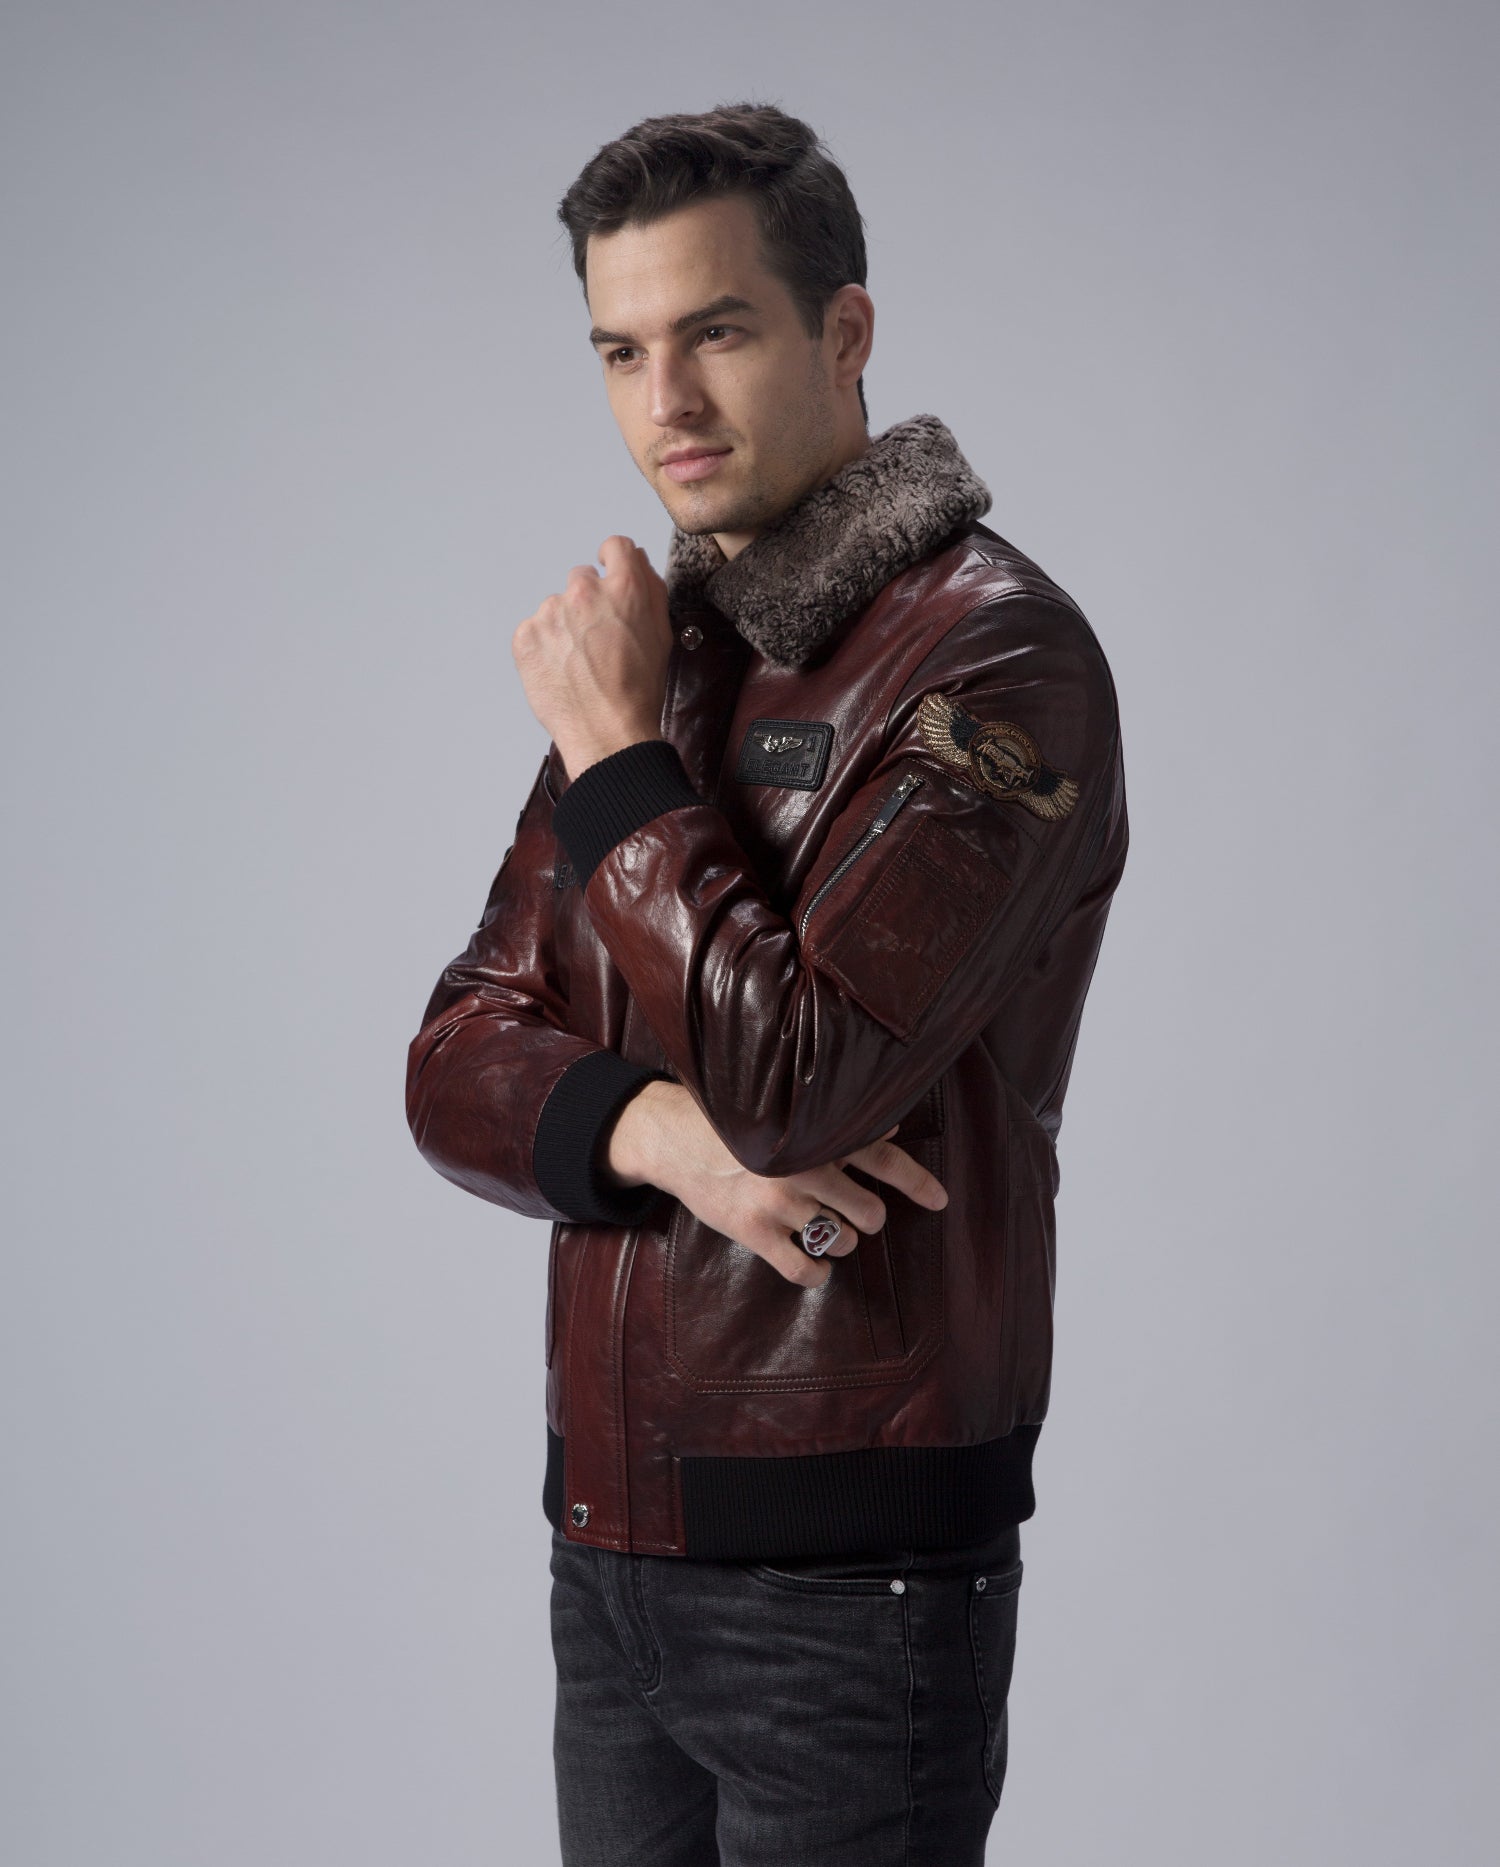 Brown G-1 Navy Aviator Leather Bomber Jacket with Removable Fur Collar